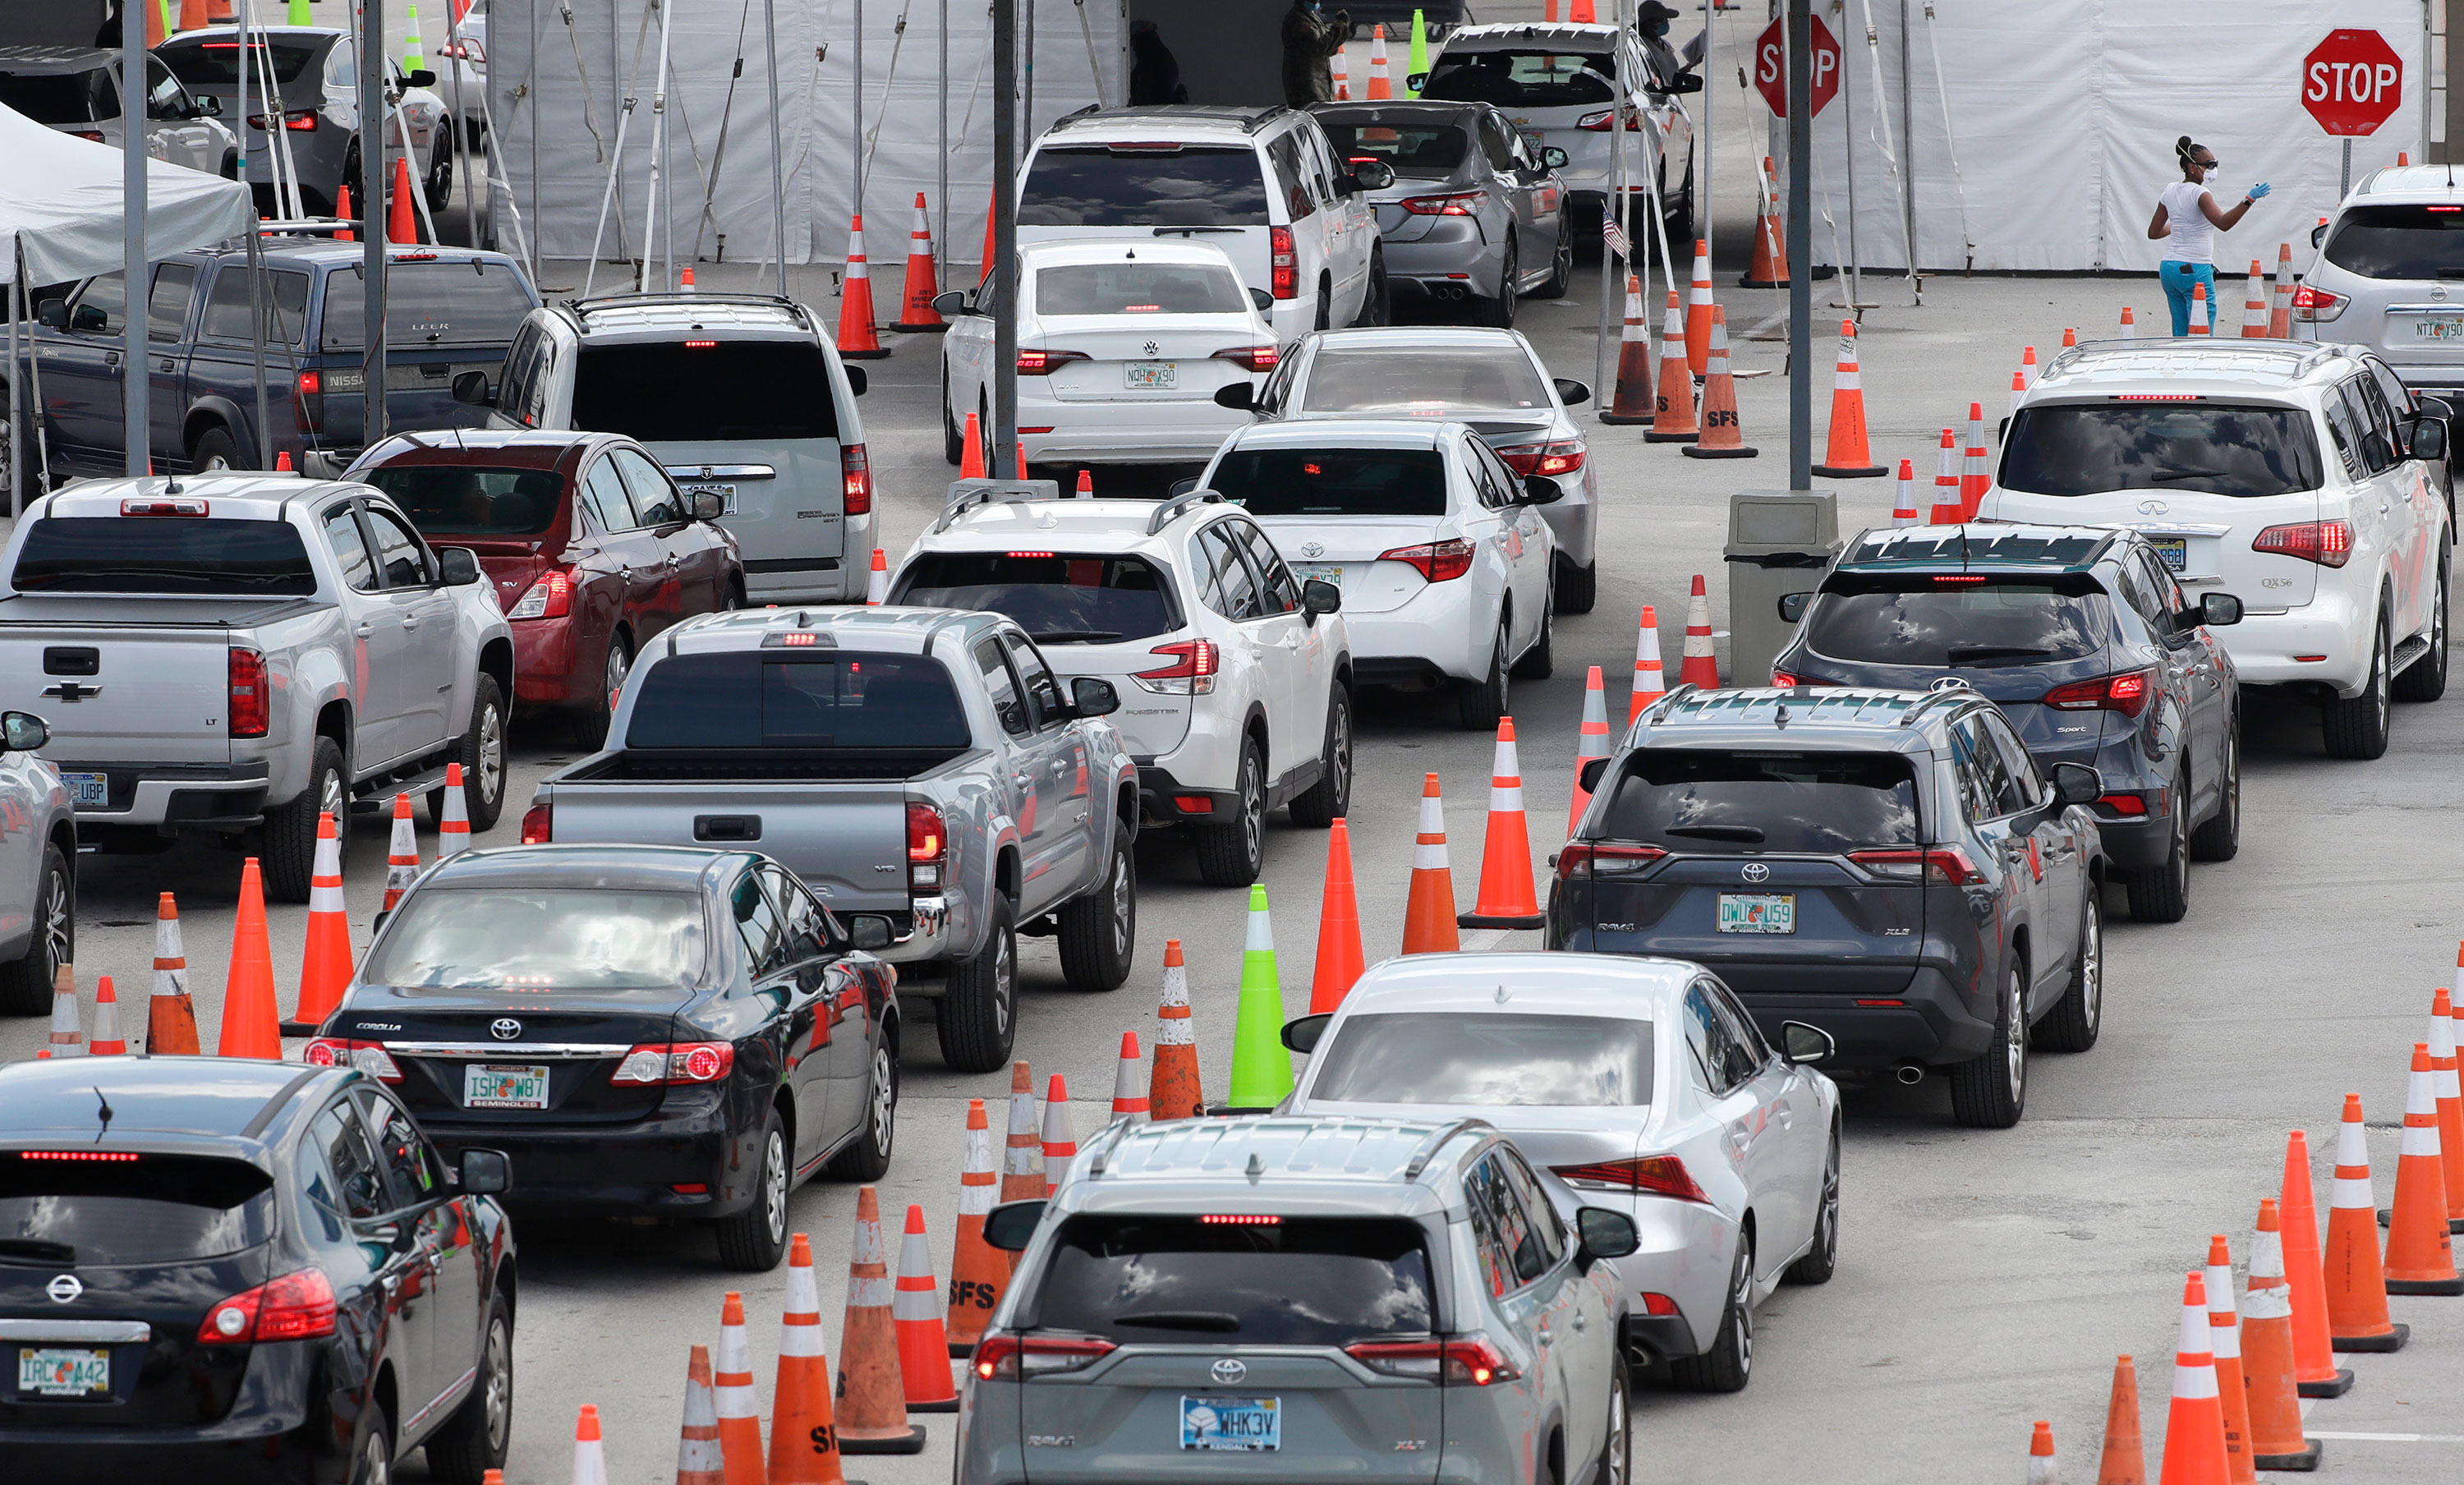 Vehicles wait in line at a drive-thru coronavirus testing site on July 8 in Miami Gardens, Florida.